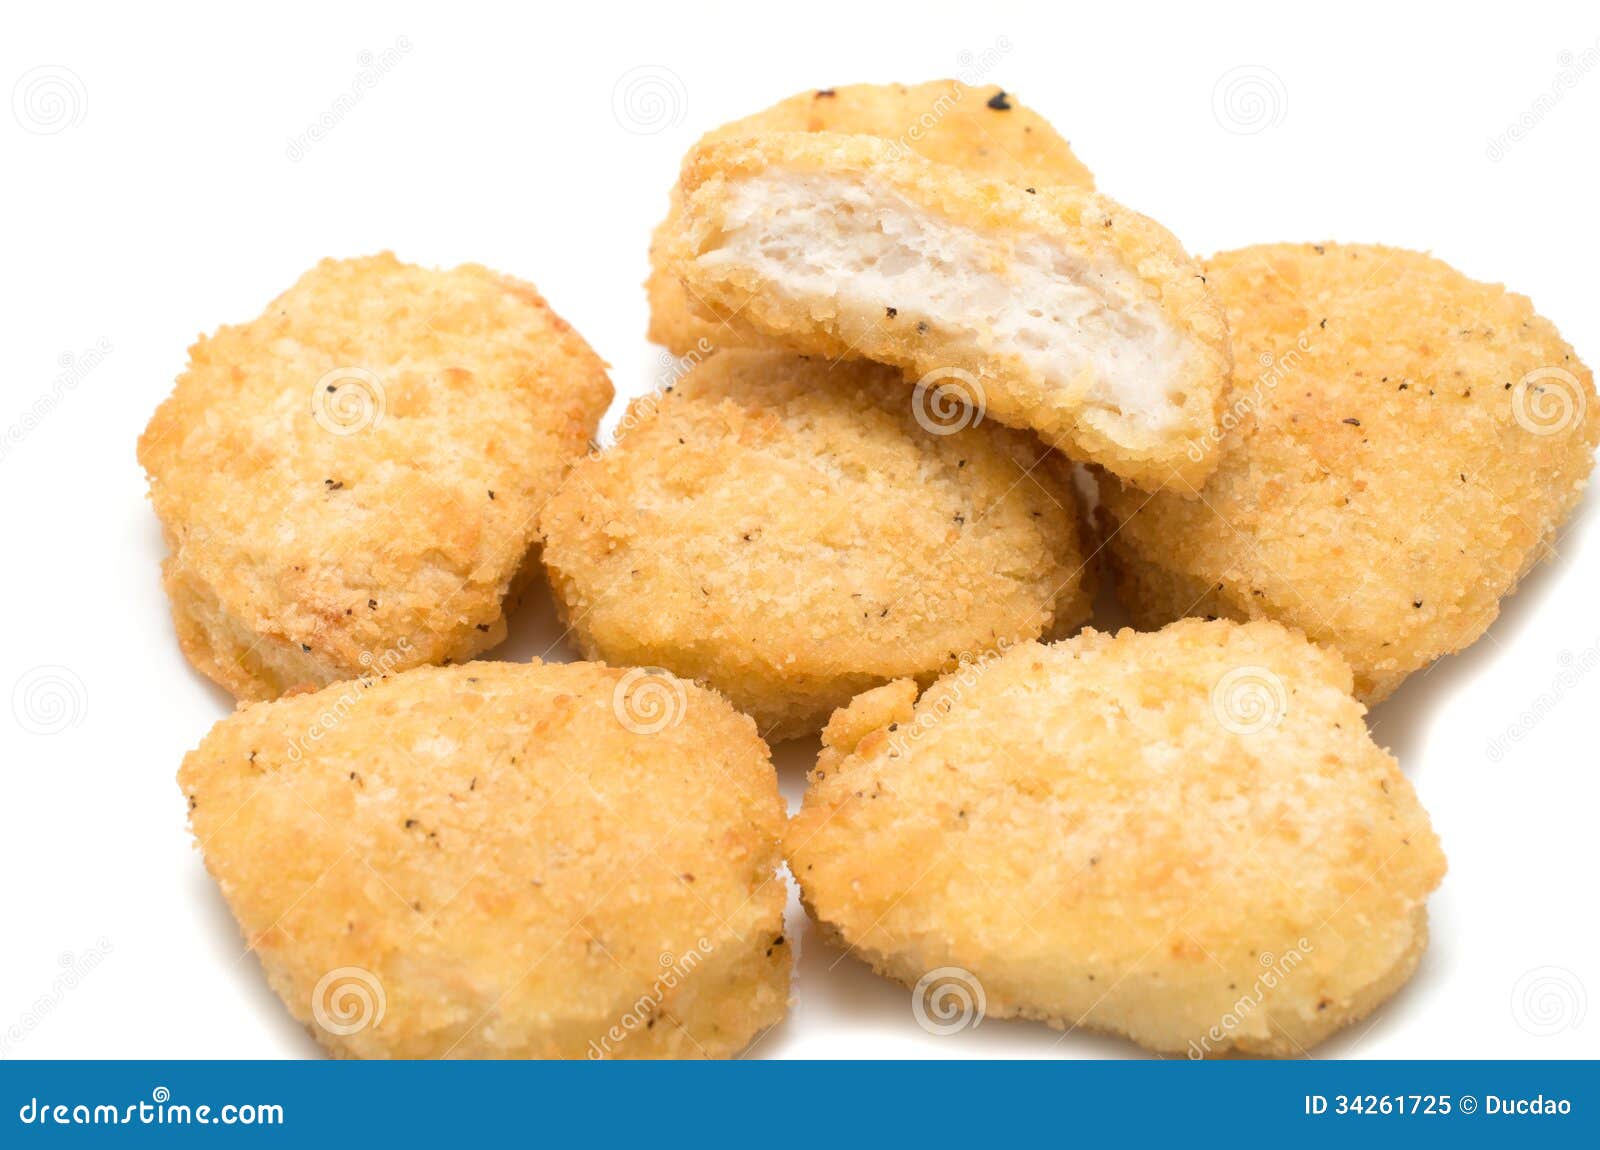 chicken nuggets clipart - photo #40